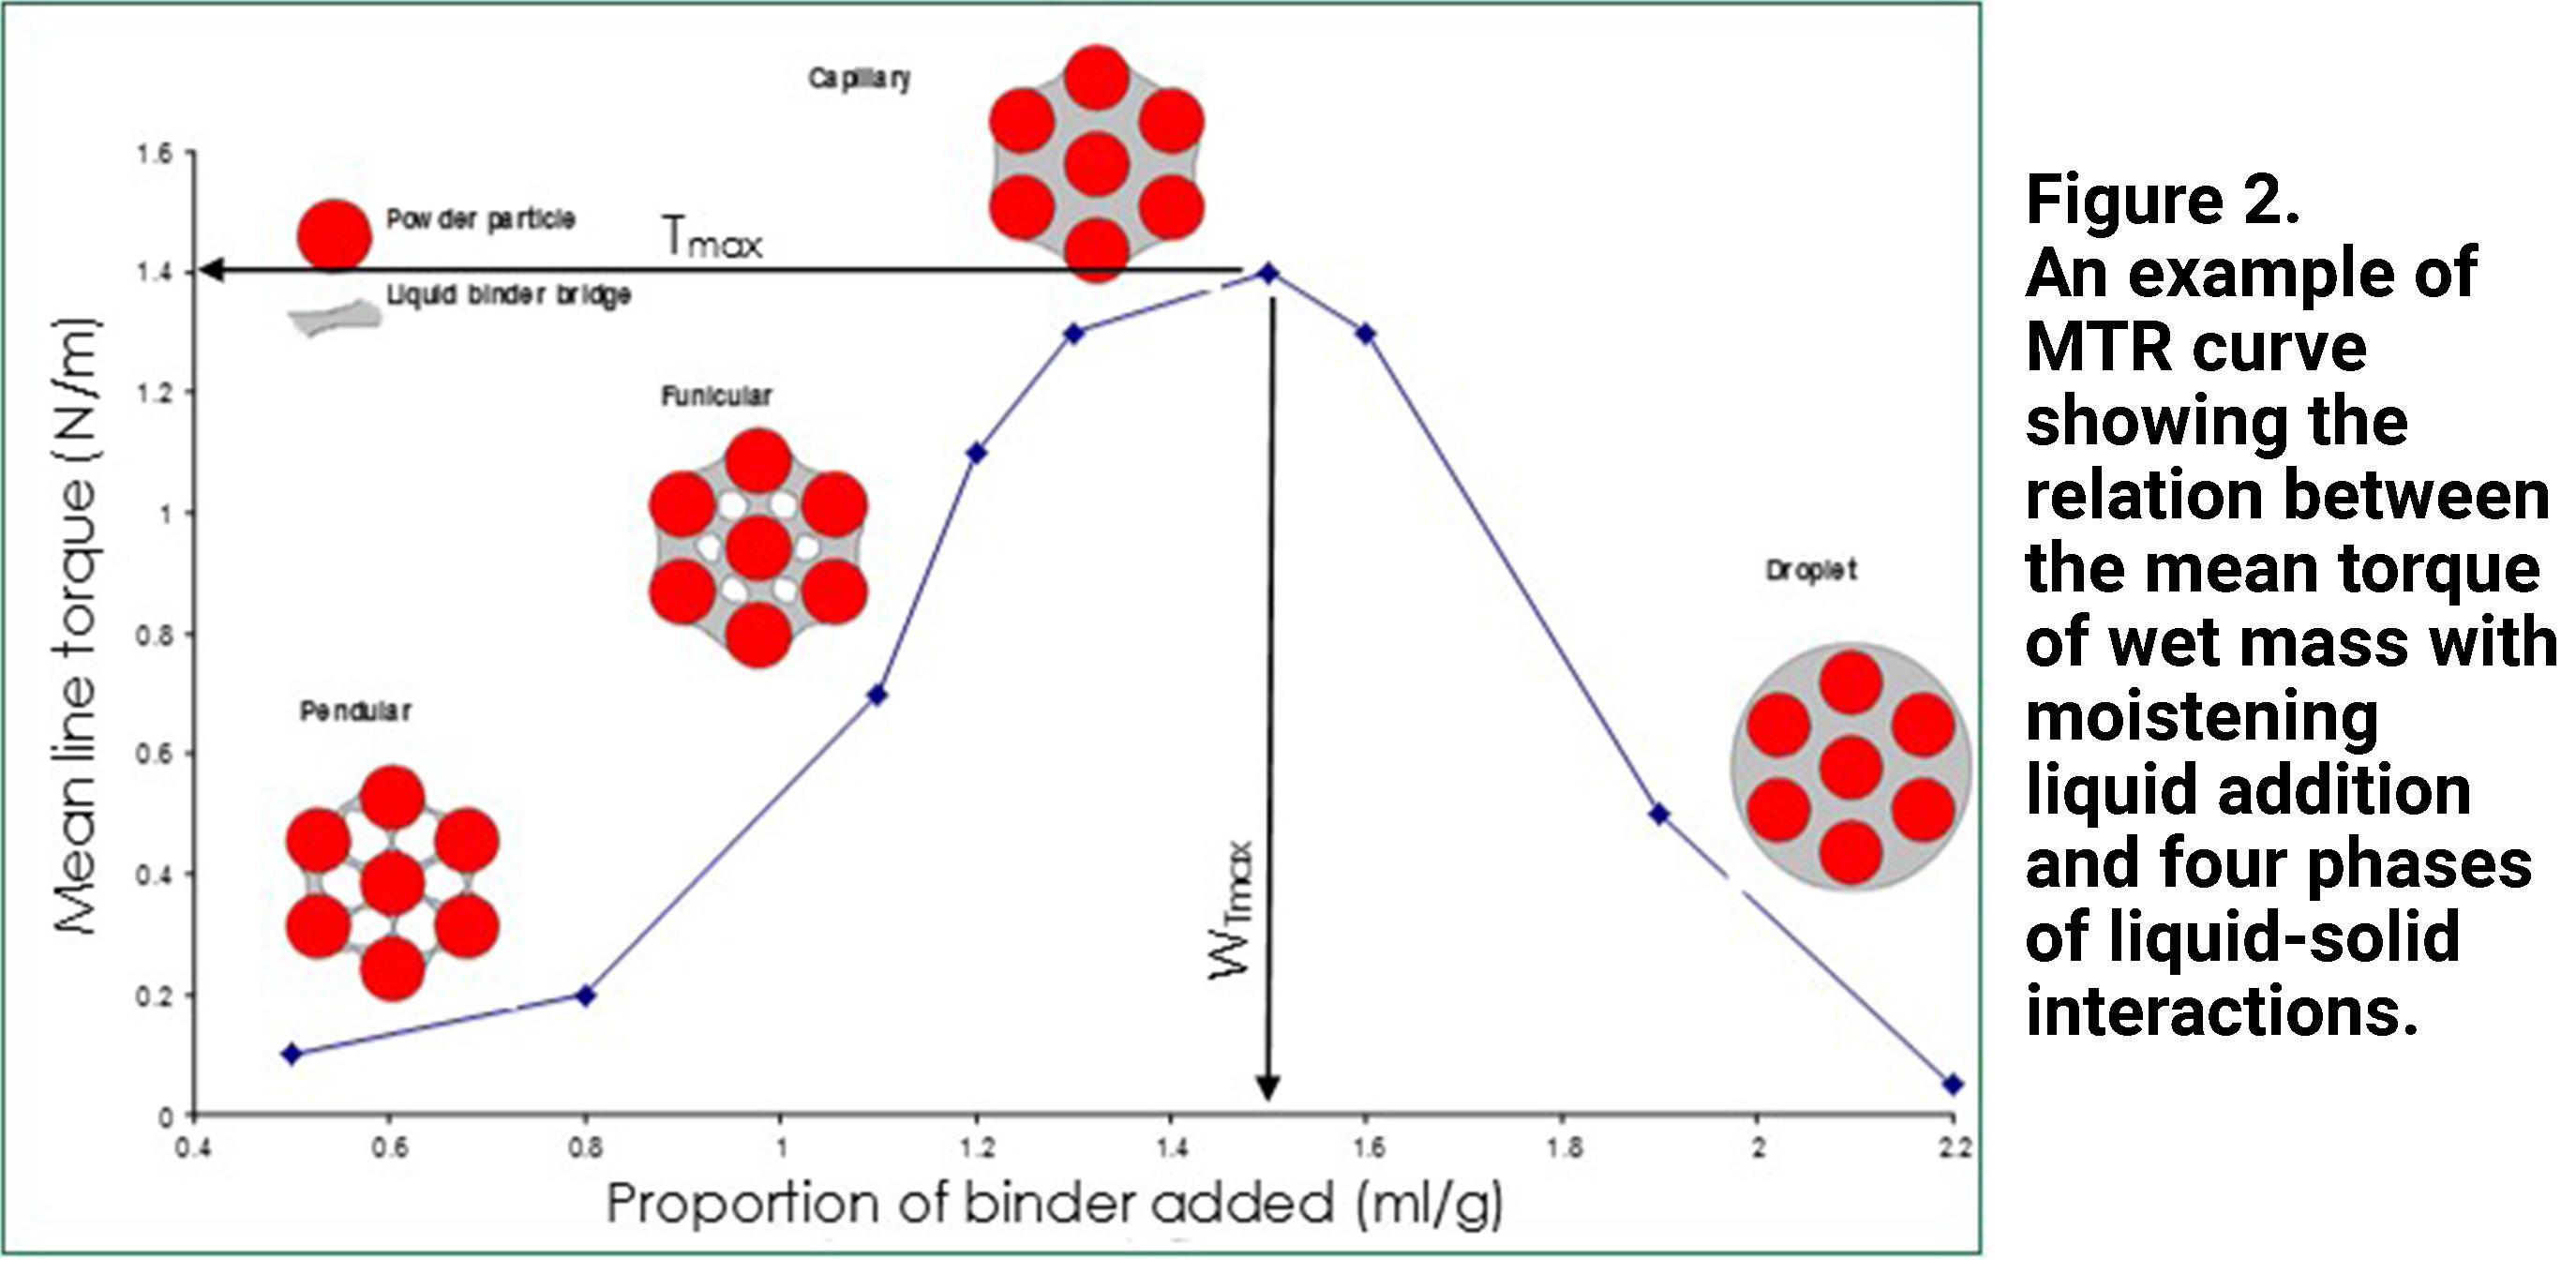 Example of the relationship between mean torque of wet mass with moistening liquid addition and four phases of liquid solid interactions